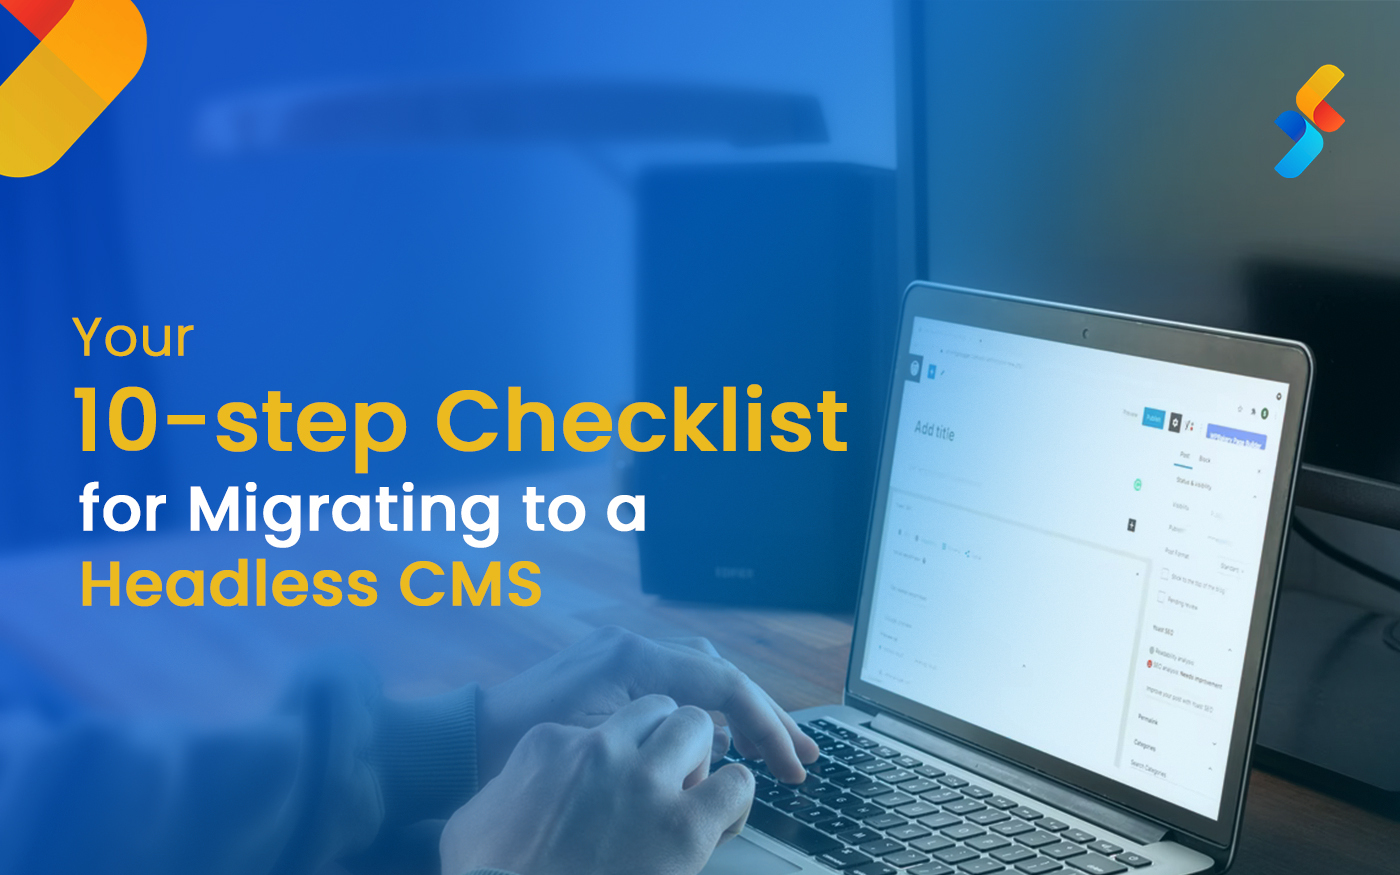 Your 10-step Checklist for Migrating to a Headless CMS